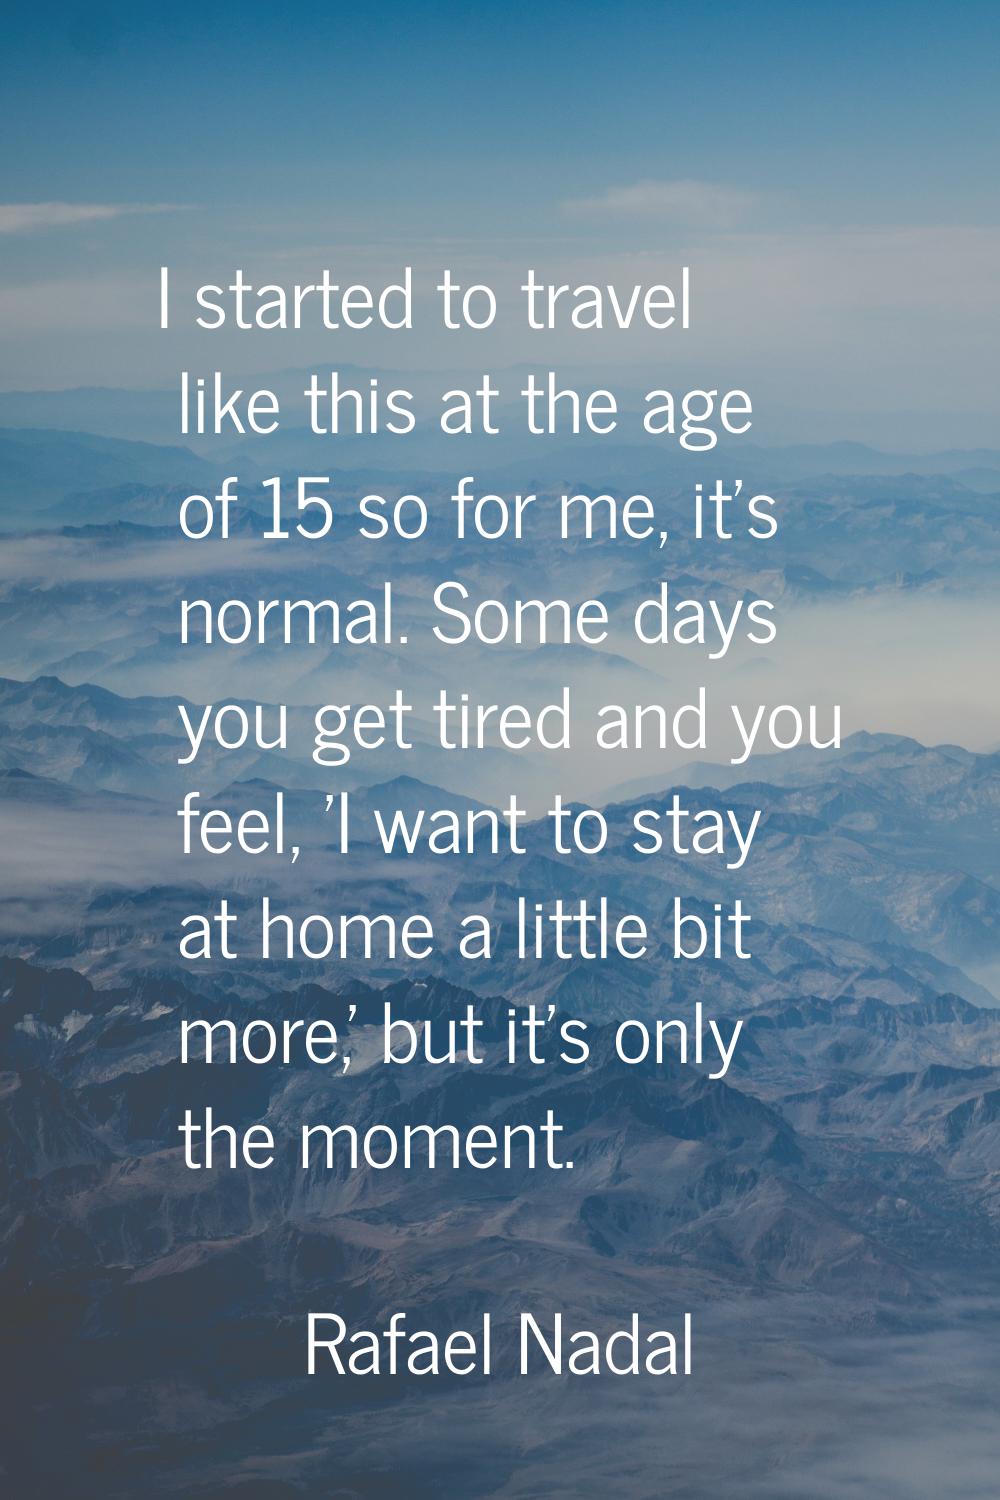 I started to travel like this at the age of 15 so for me, it's normal. Some days you get tired and 